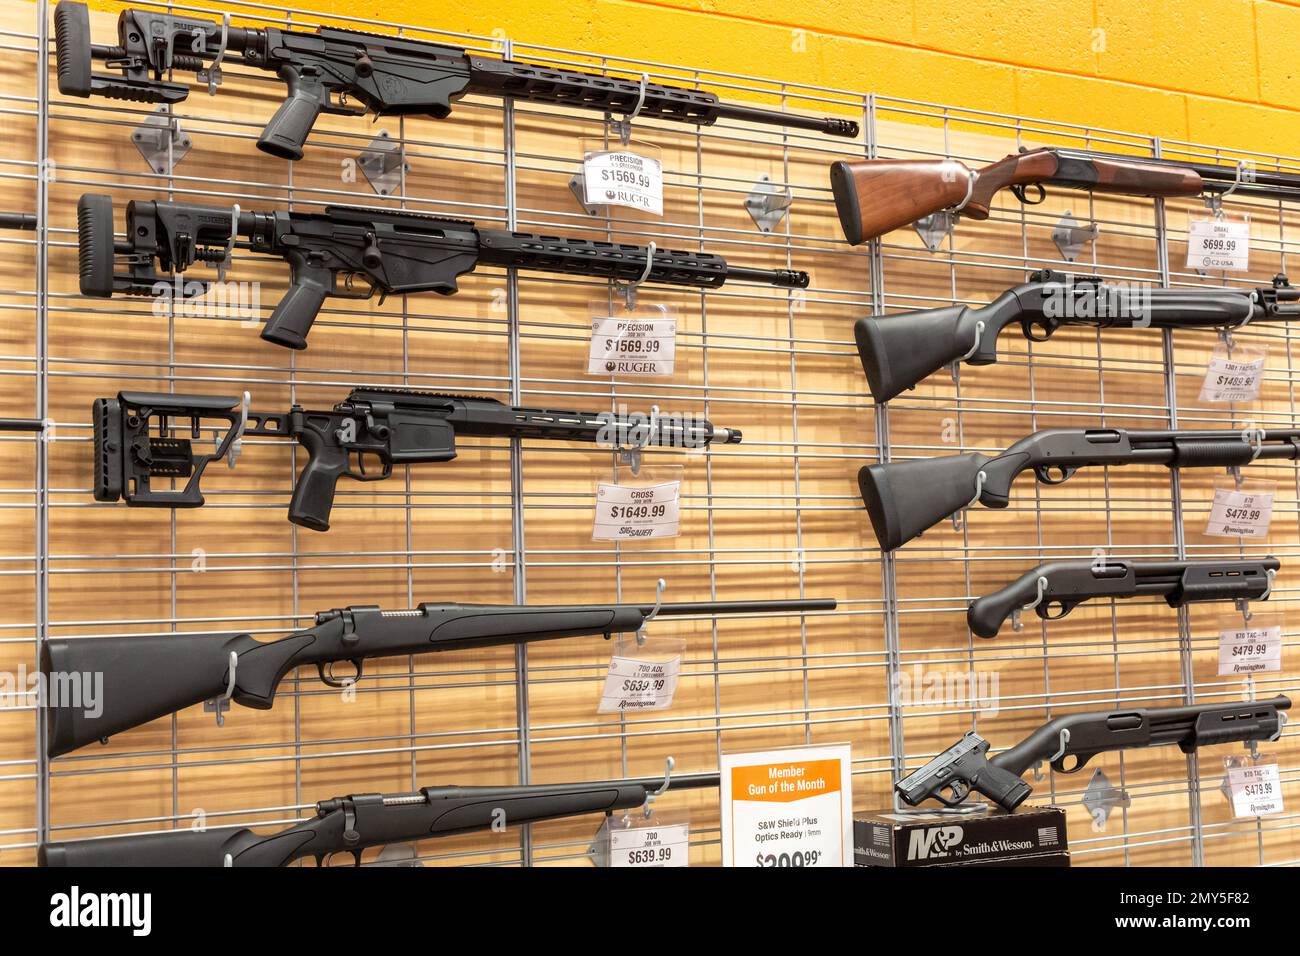 Southgate, Michigan - Range USA, a national chain of gun stores, opened its fourth Michigan location. The store sells firearms and ammunition, has an Stock Photo